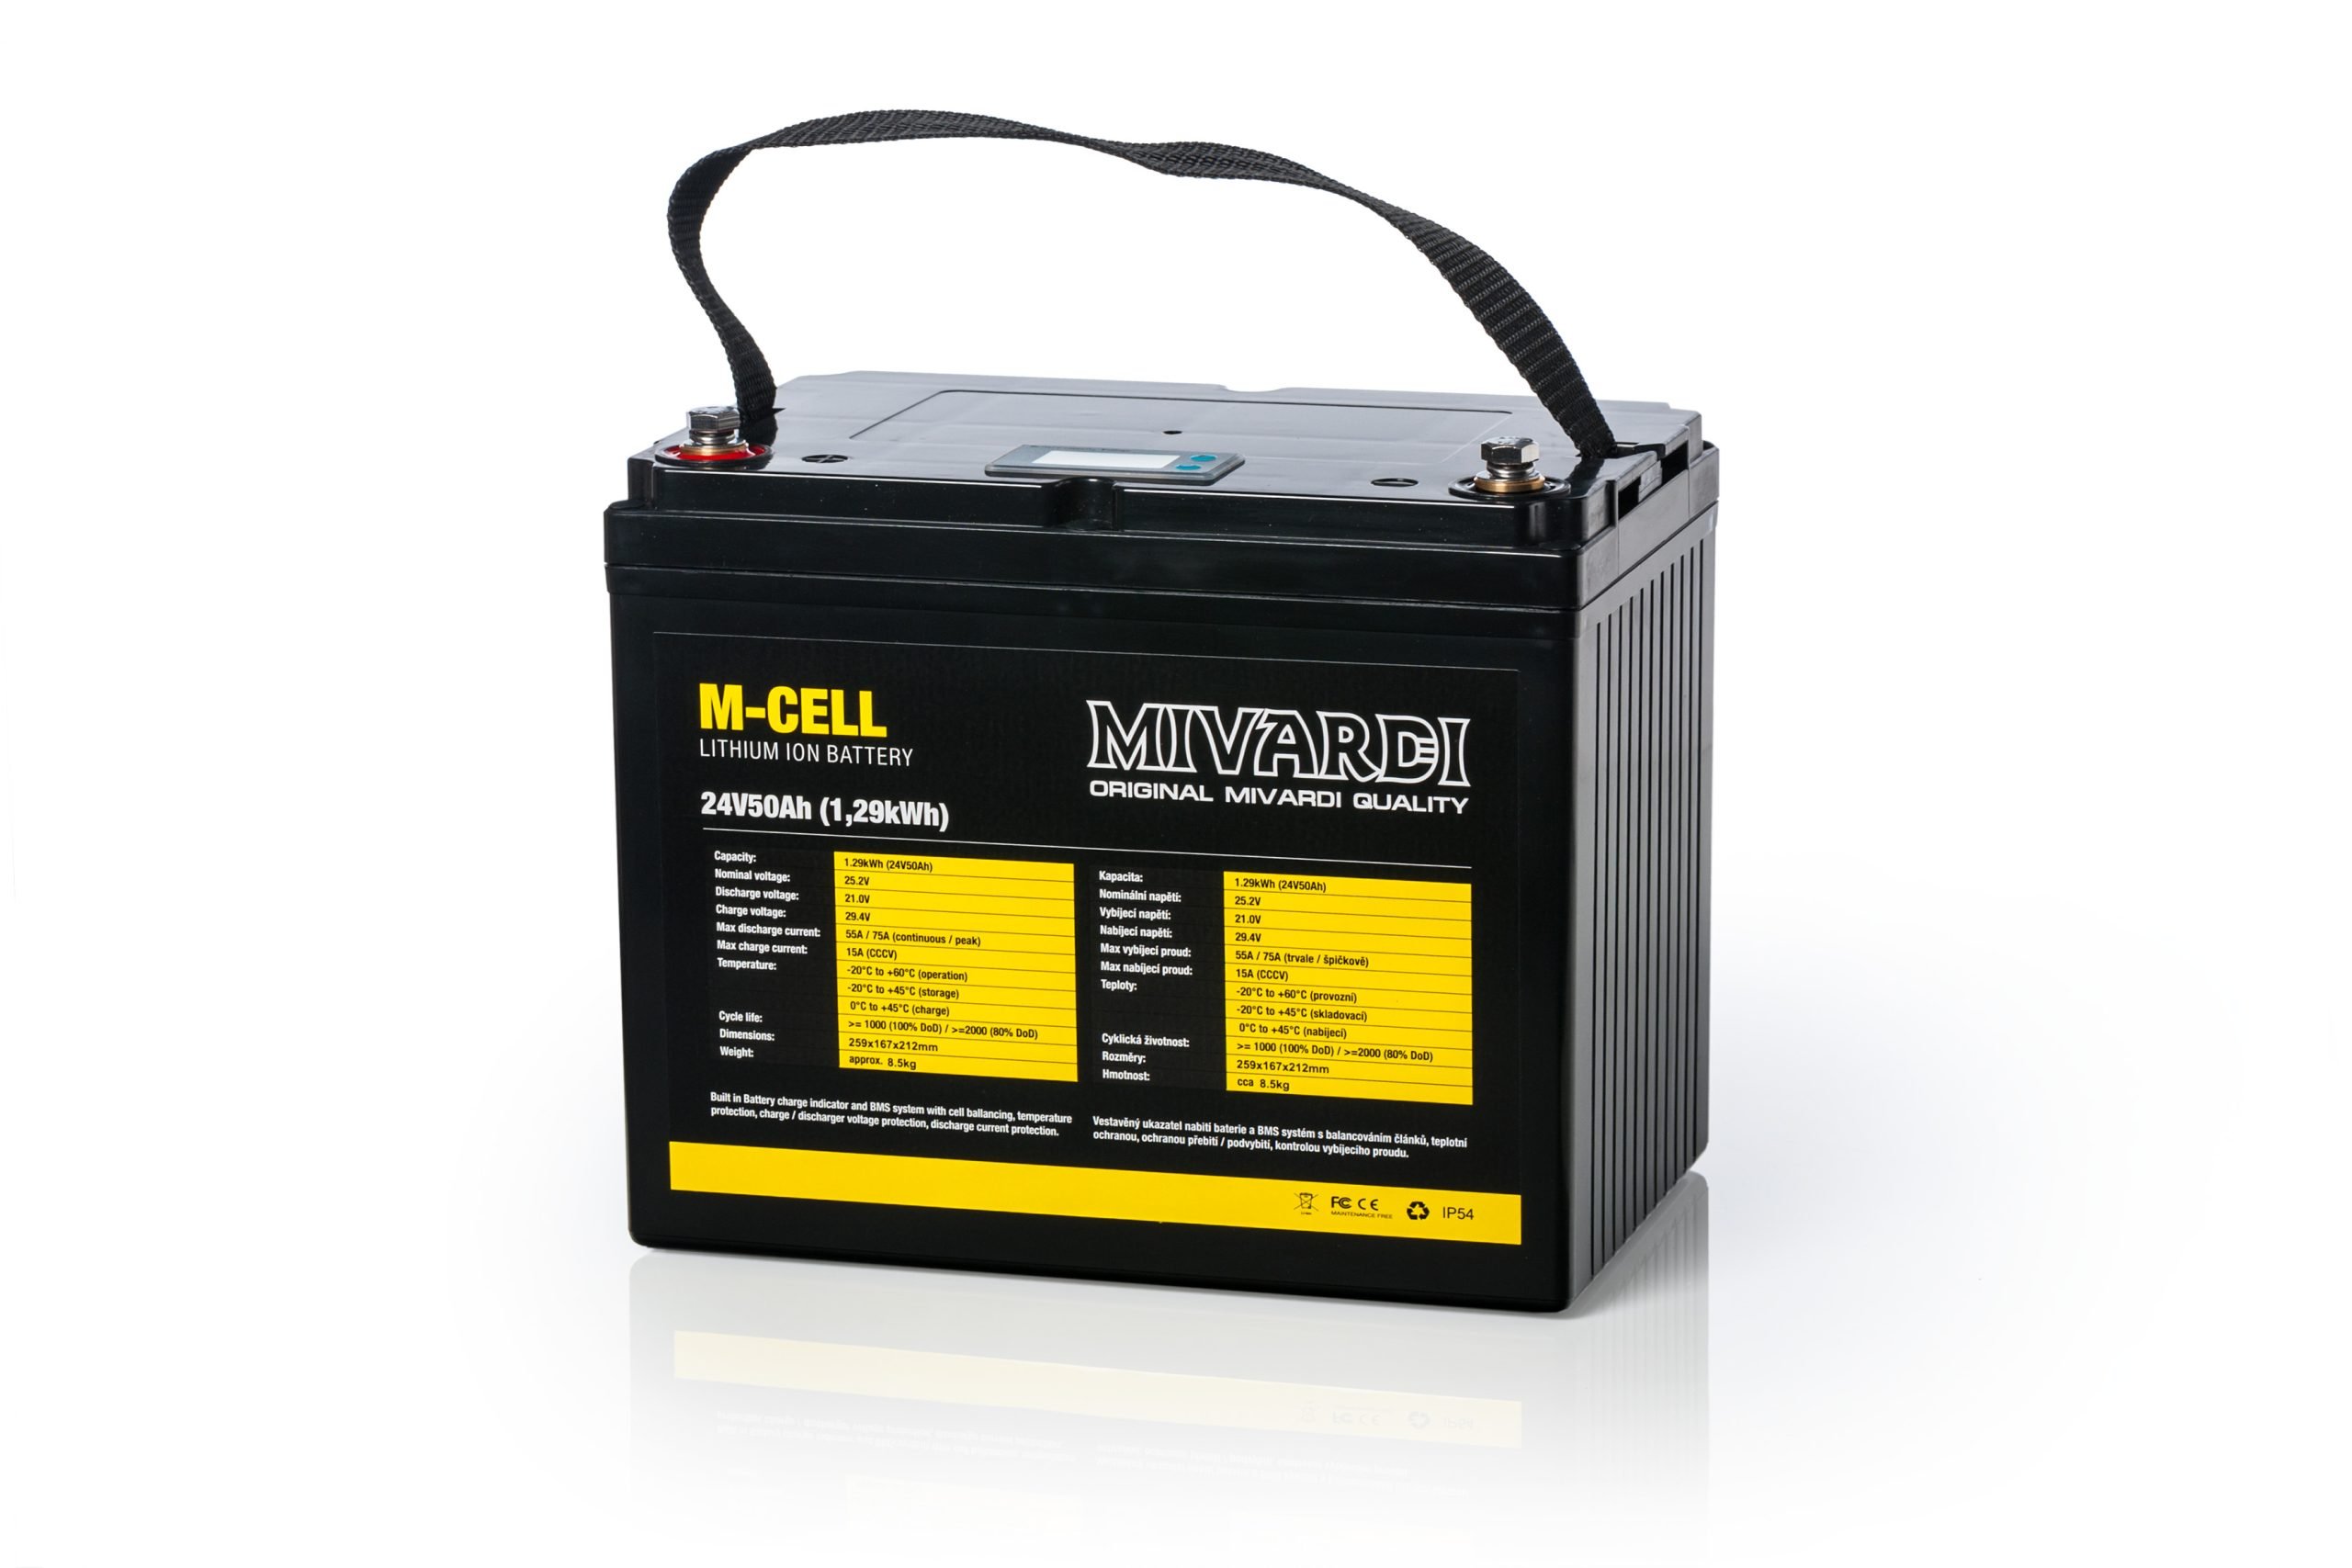 Europe Shop Mivardi M-MCELL2450C Lithium battery M-CELL 24V 50Ah + 10A charger